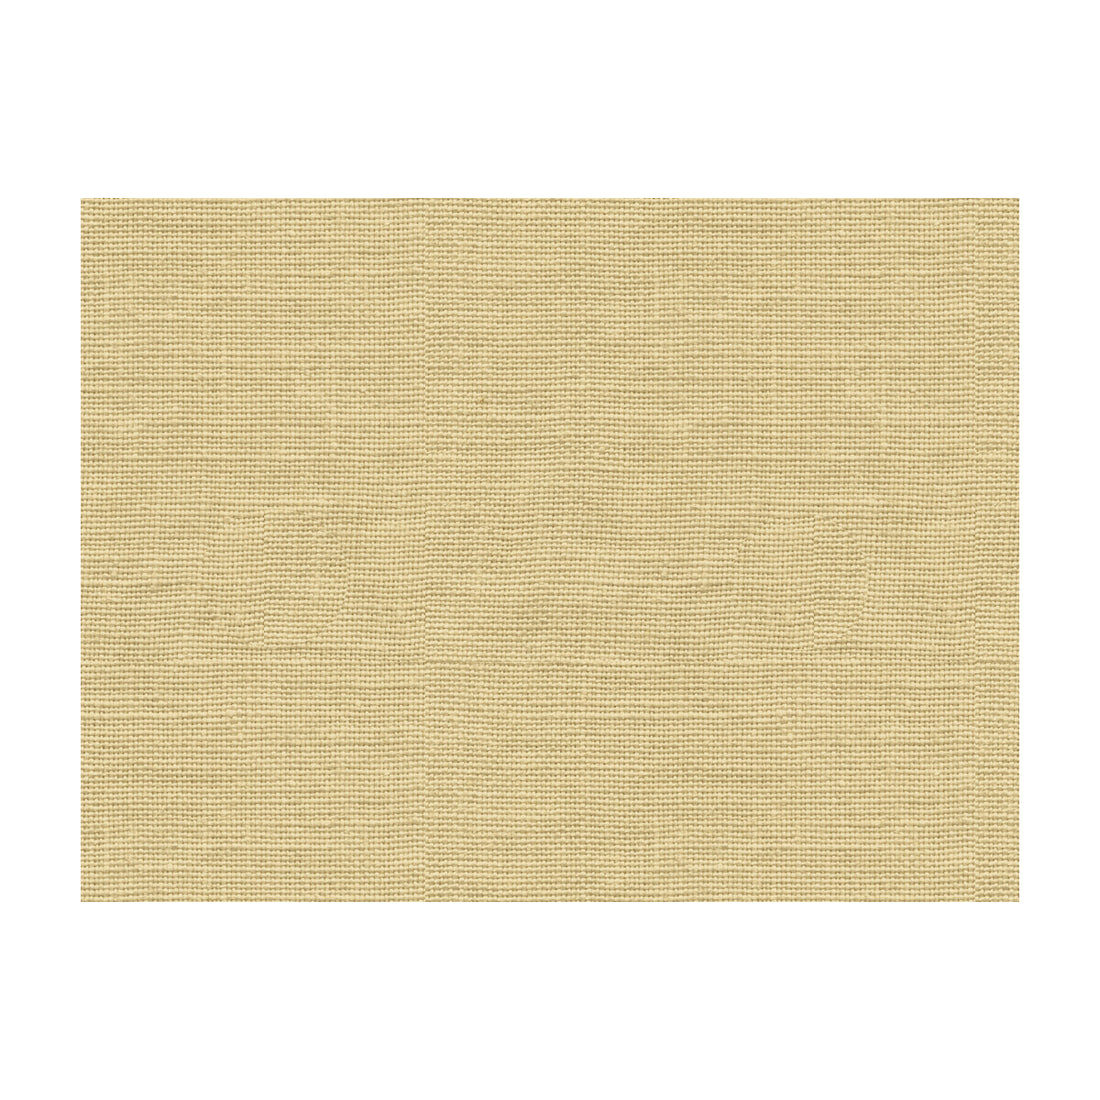 Kravet Basics fabric in 33767-16 color - pattern 33767.16.0 - by Kravet Basics in the Perfect Plains collection